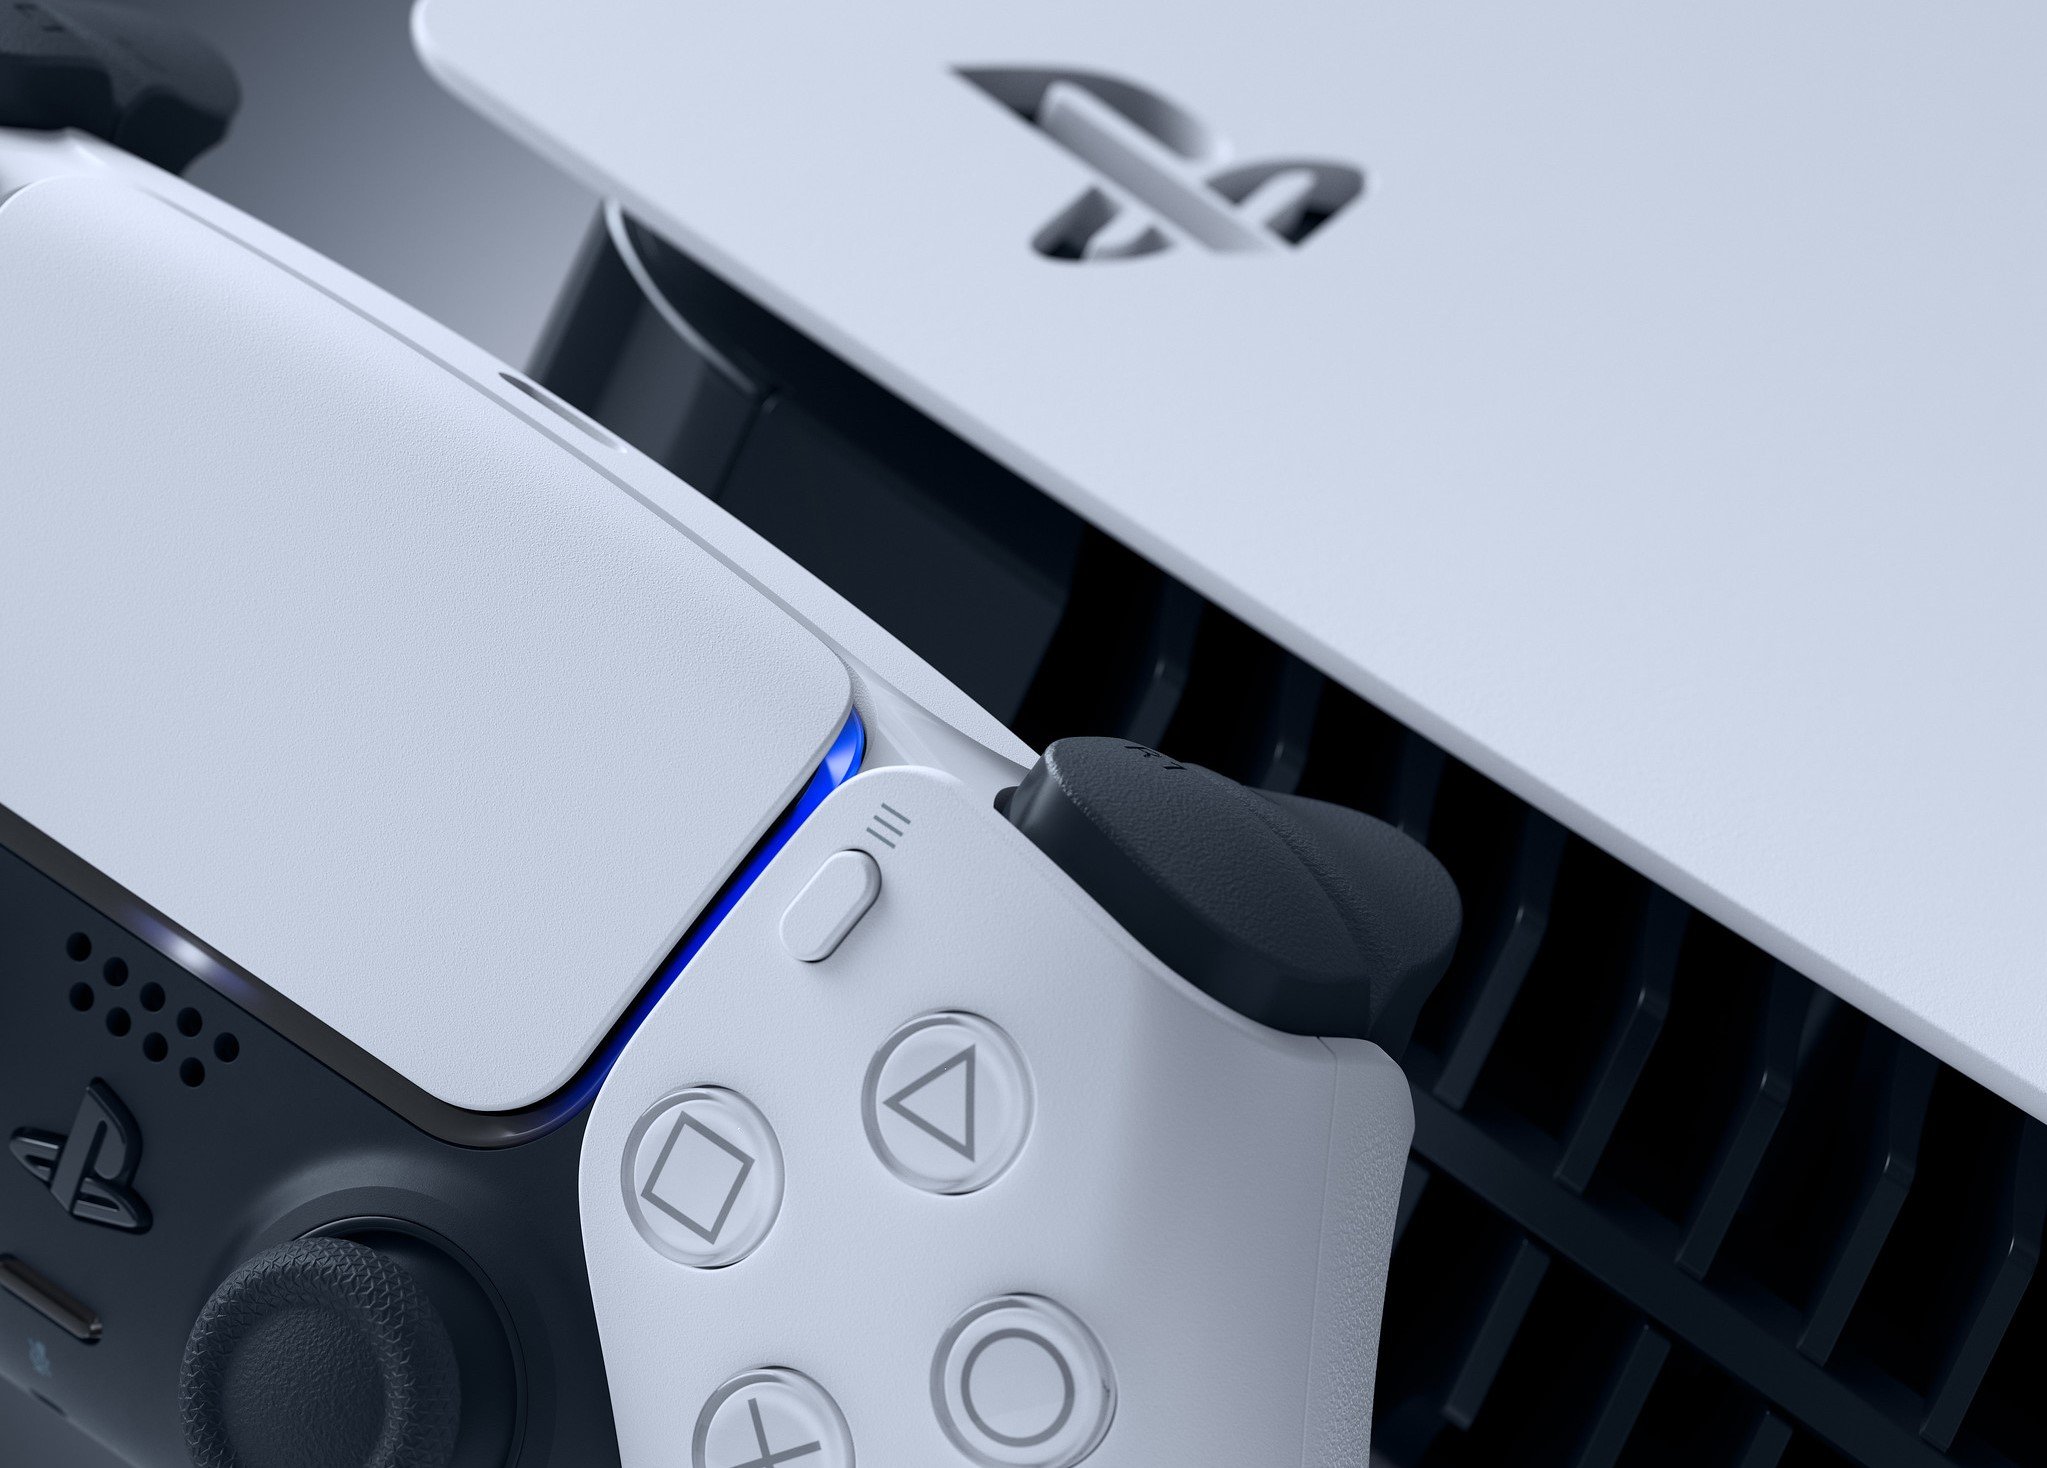 PS5 New Console Image are Highly Seductive